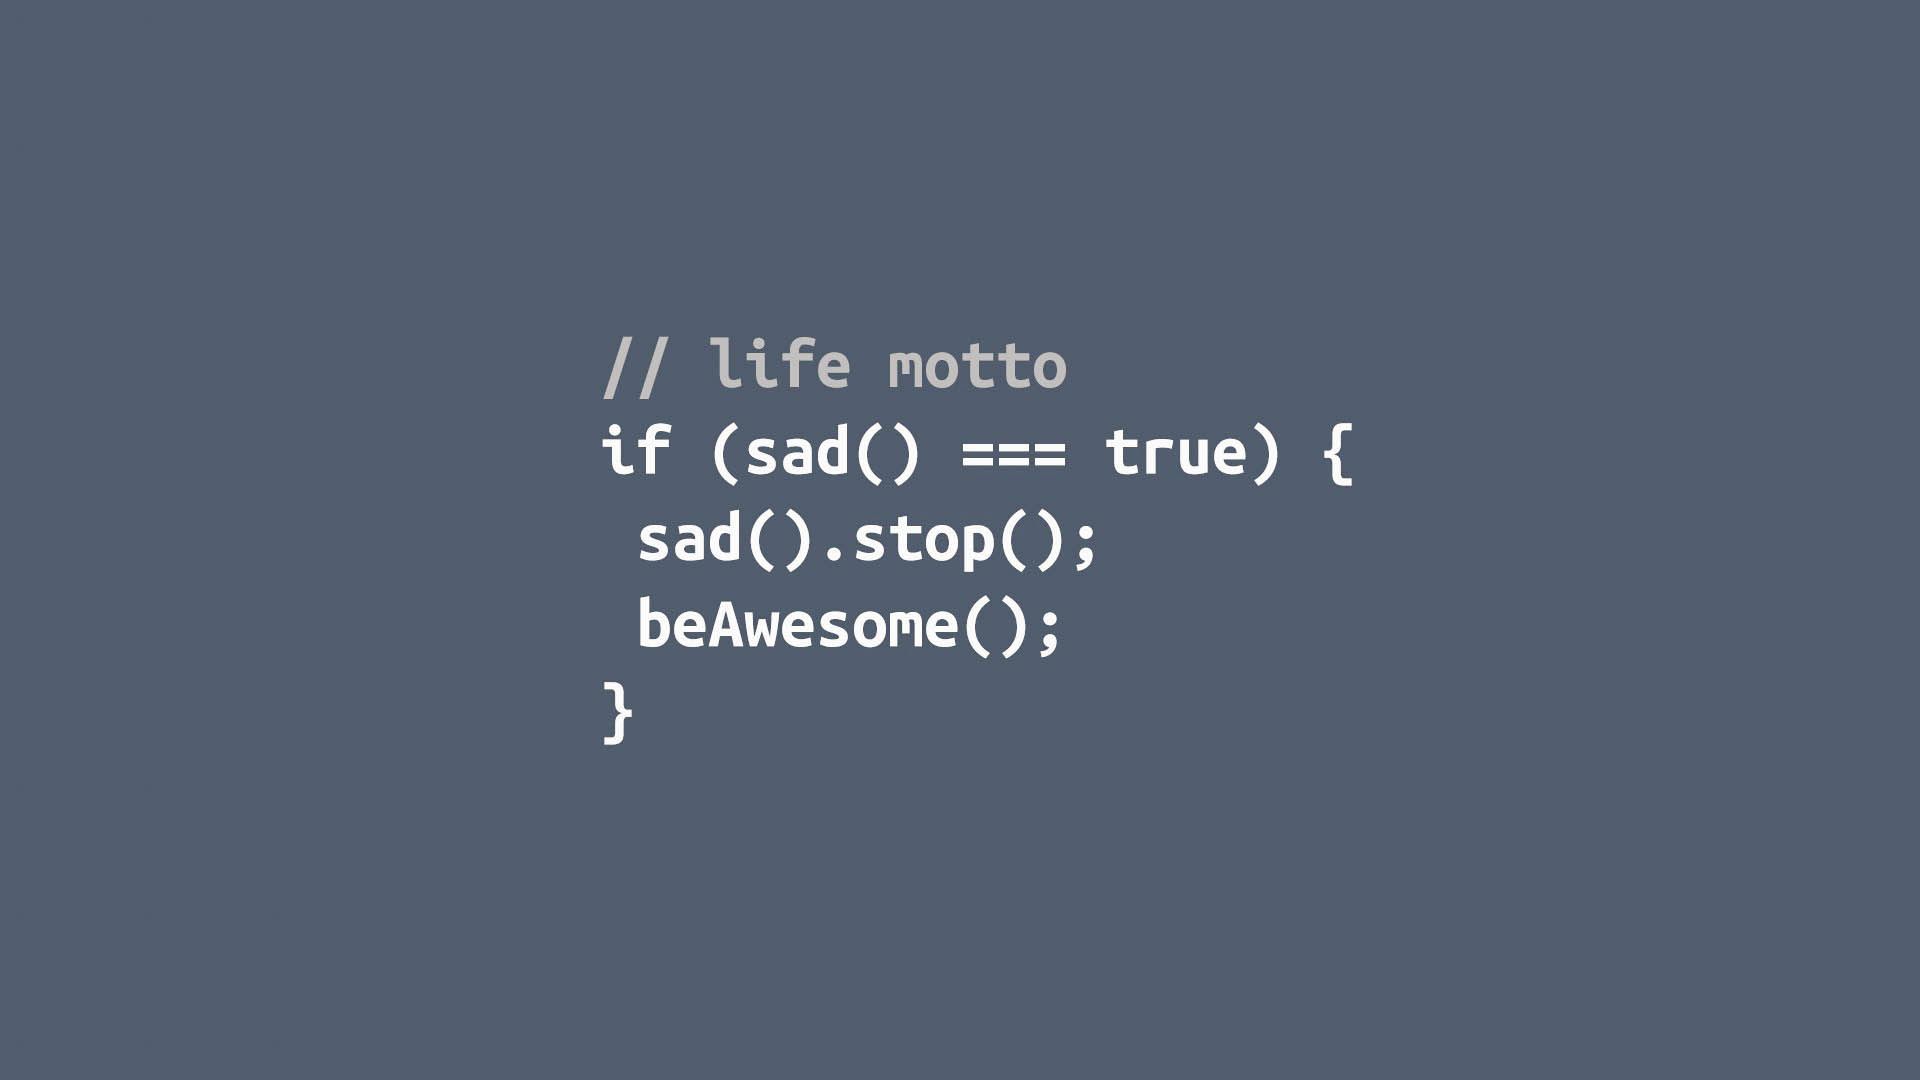 Code Image And Picture (Technology) HD Wallpaper. Coding quotes, Life motto, Programming quote